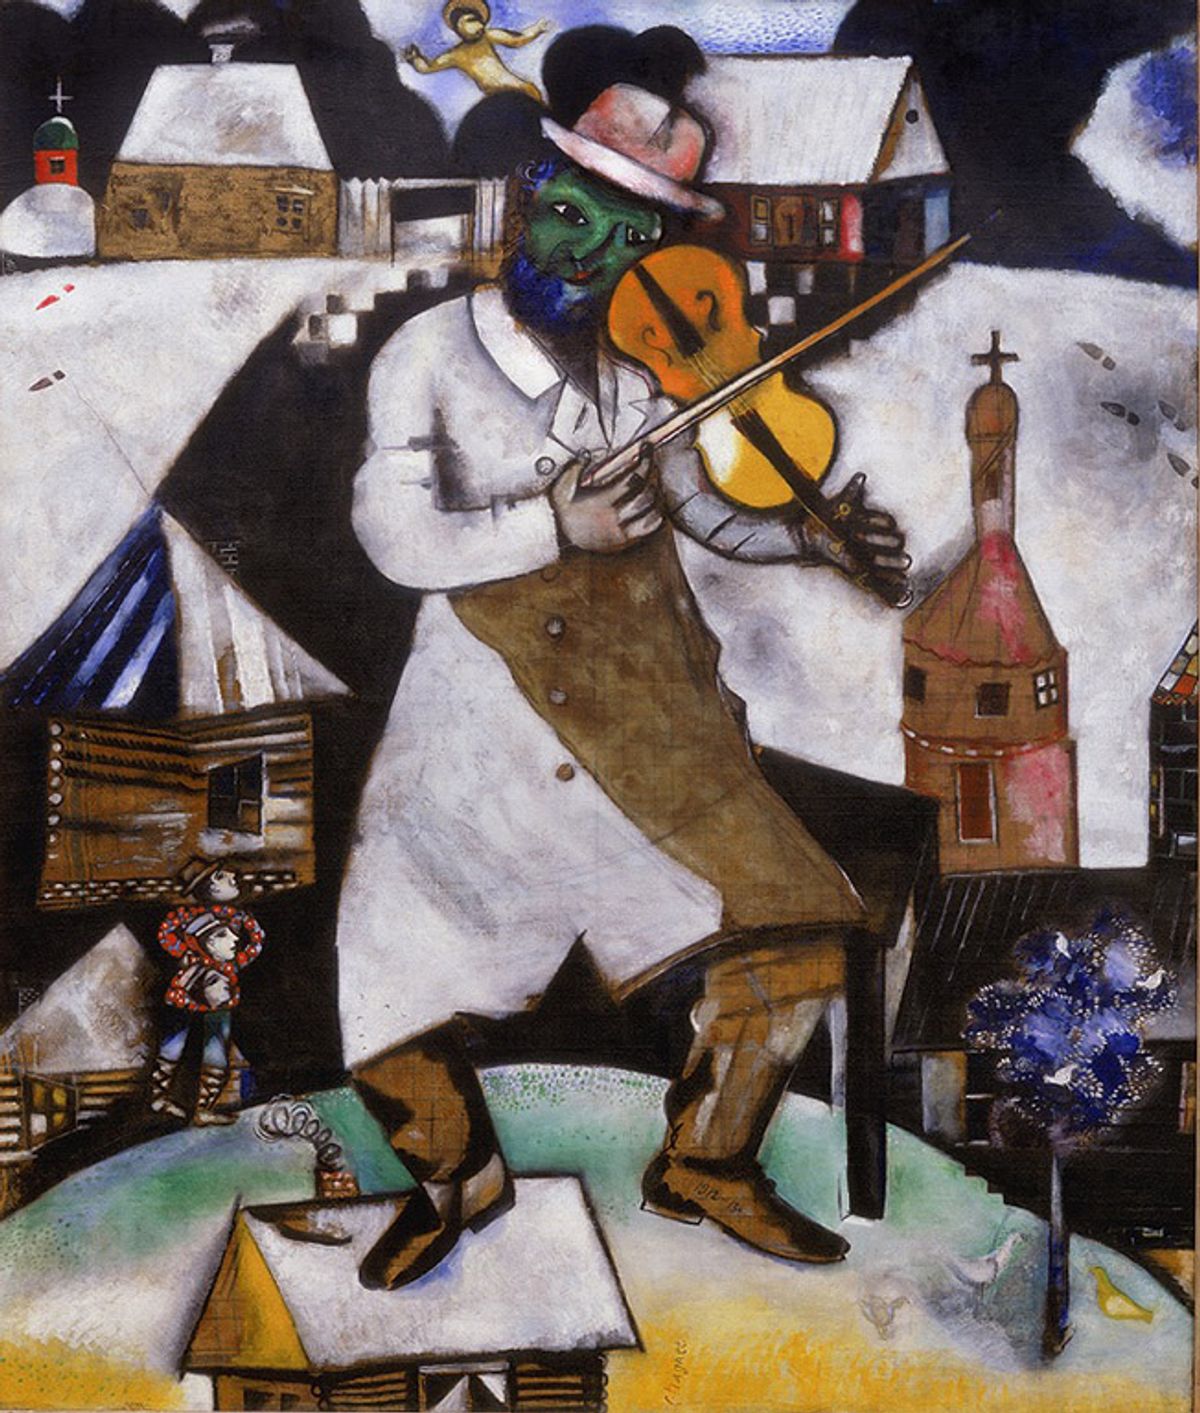 Chagall's The Fiddler (1912-13) c/o Pictoright Amsterdam